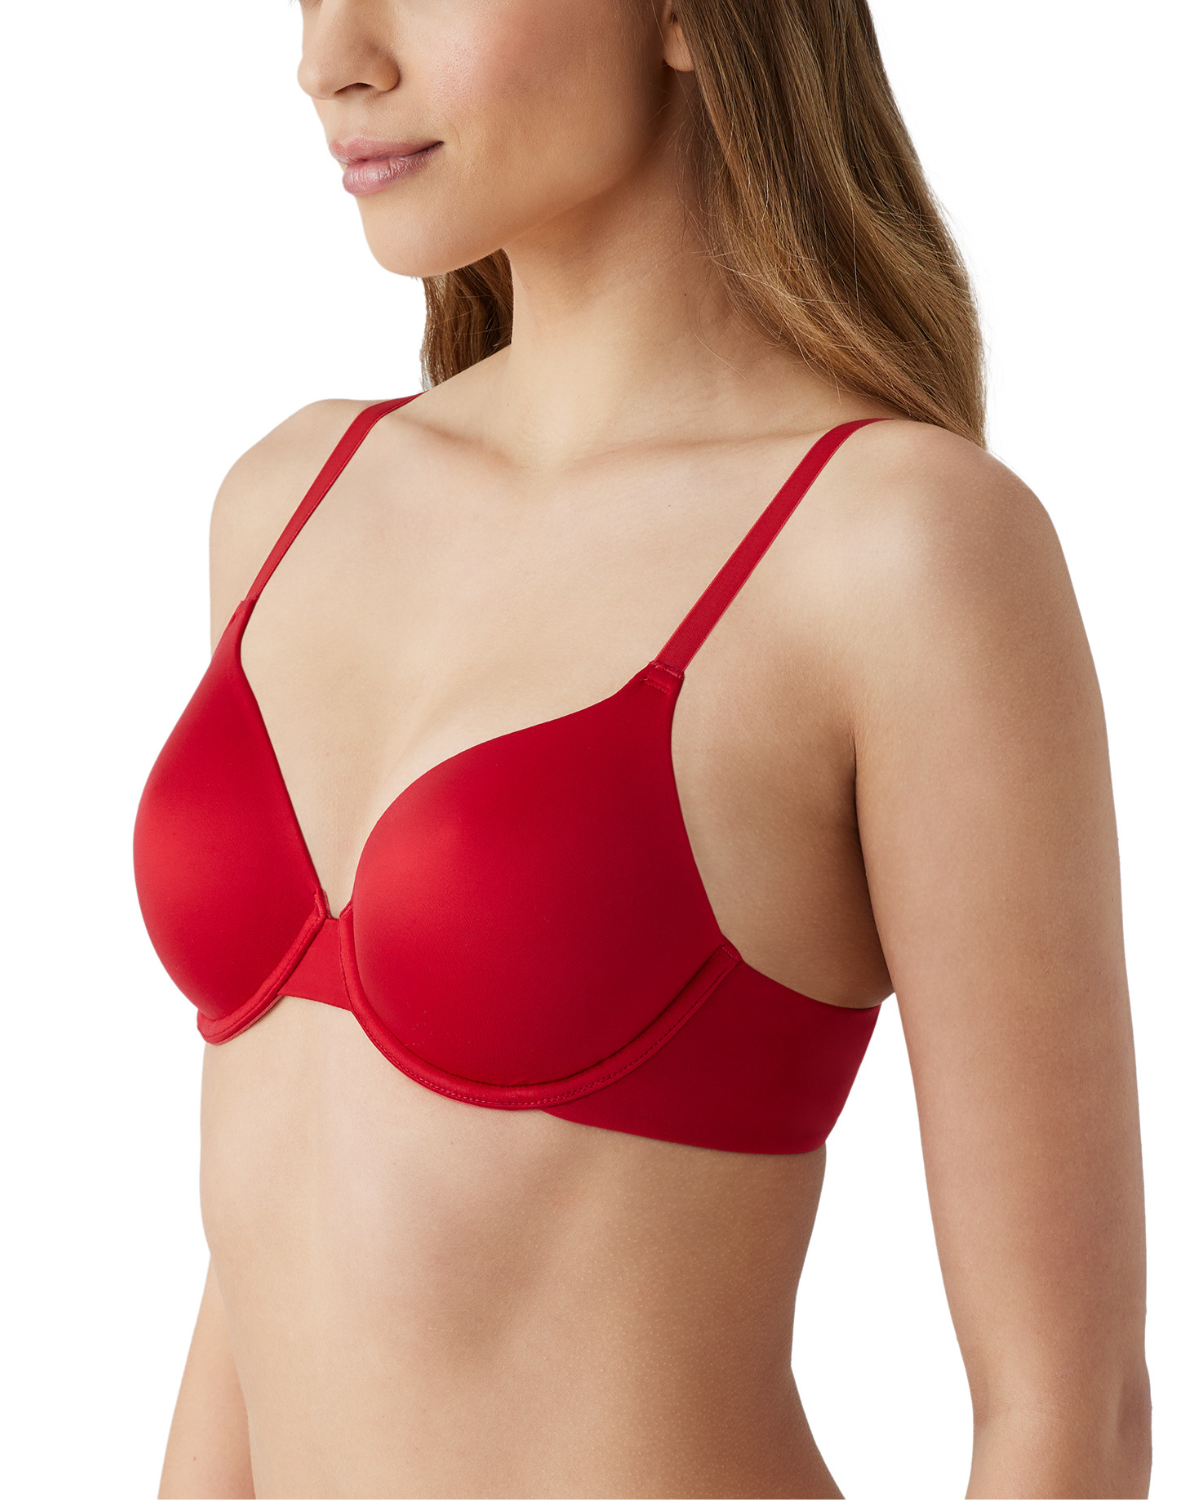 Side view of model on a white backdrop wearing a red underwire t-shirt bra.